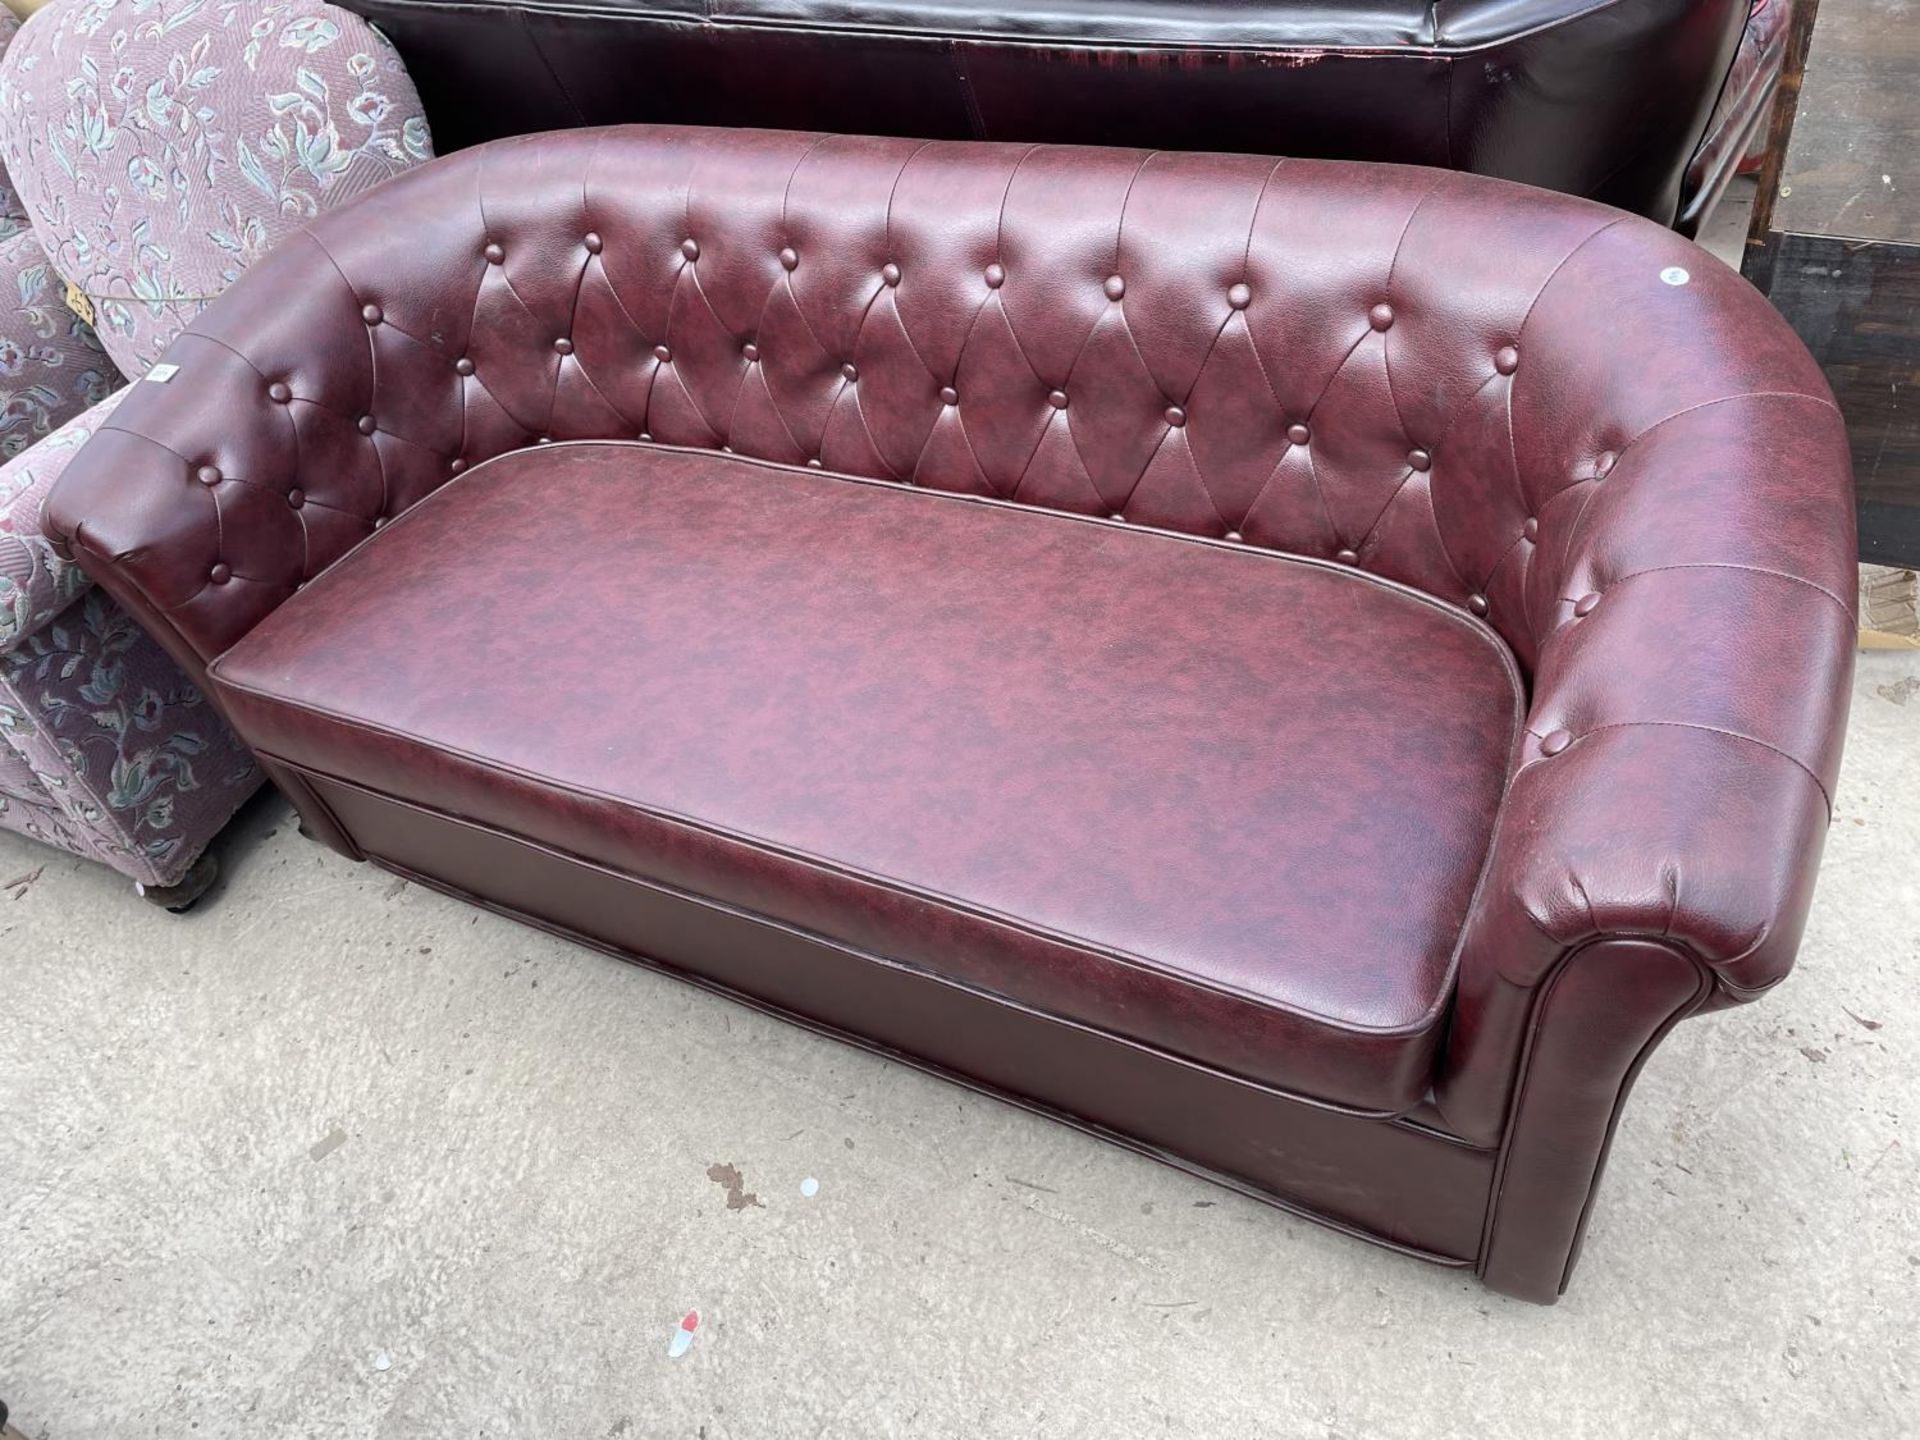 AN OXBLOOD BUTTON-BACK CHESTERFIELD STYLE SETTEE